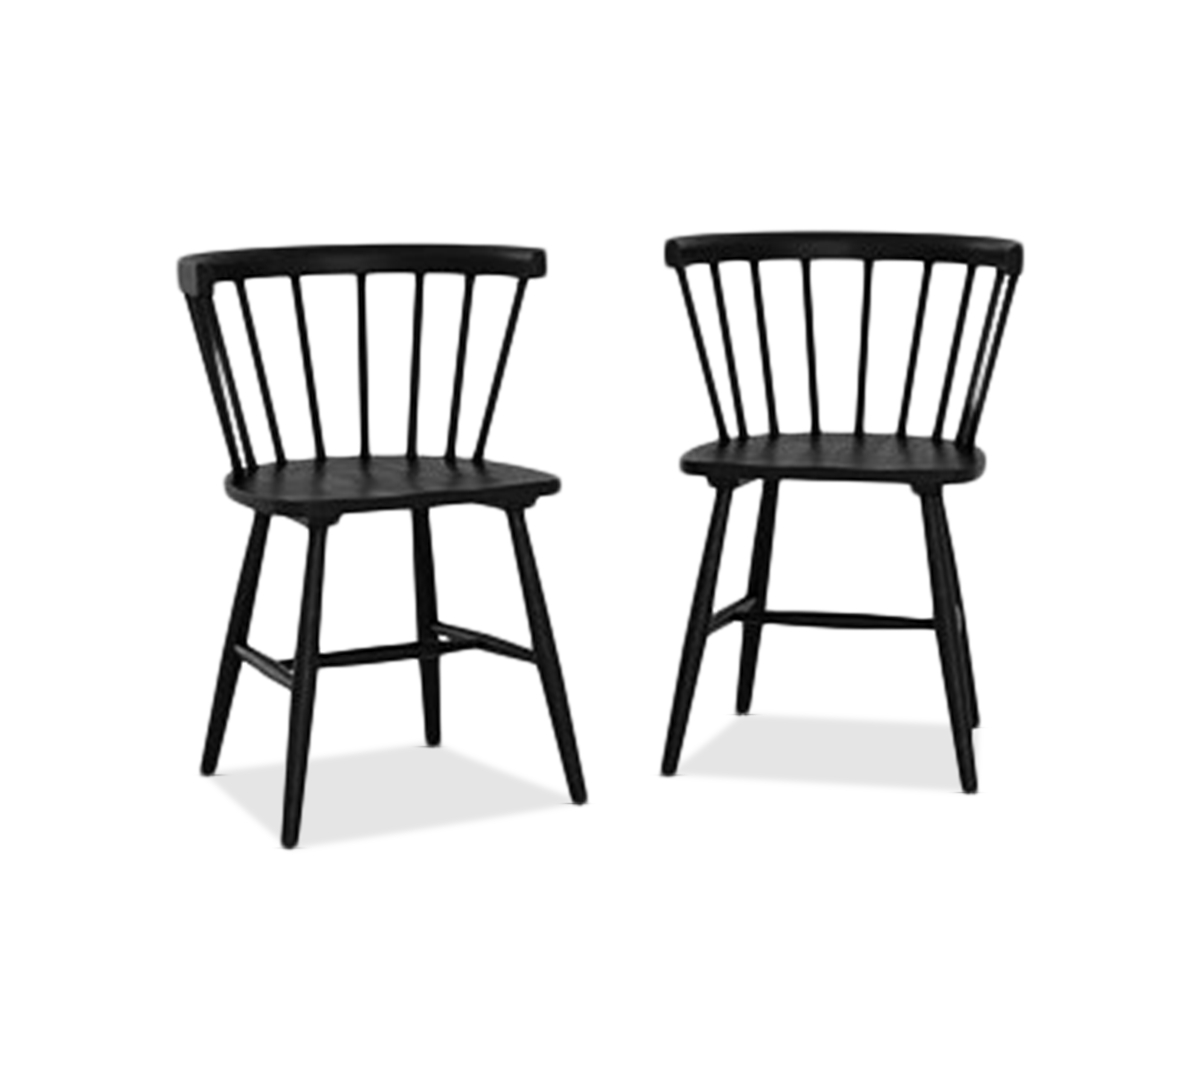 Eq3 Bernia 2pc Dining Chair Set In No Color